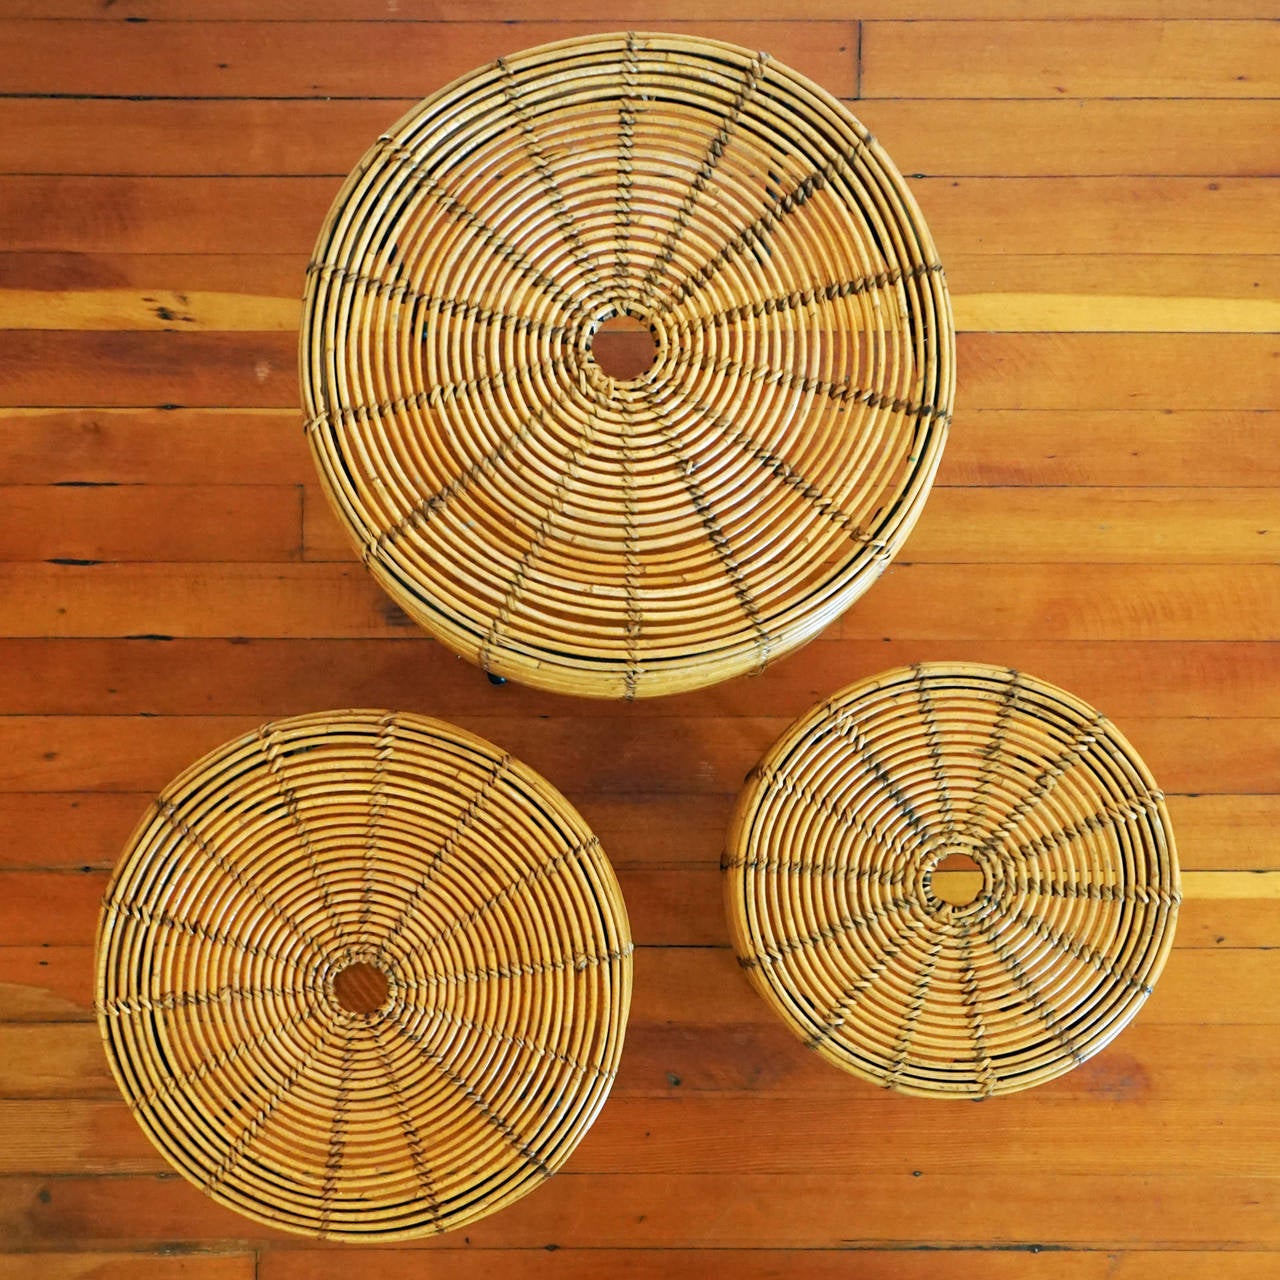 Set of three wicker and iron nesting tables from 1953 by John Risley, (1919-2002). 

Dimensions:

21